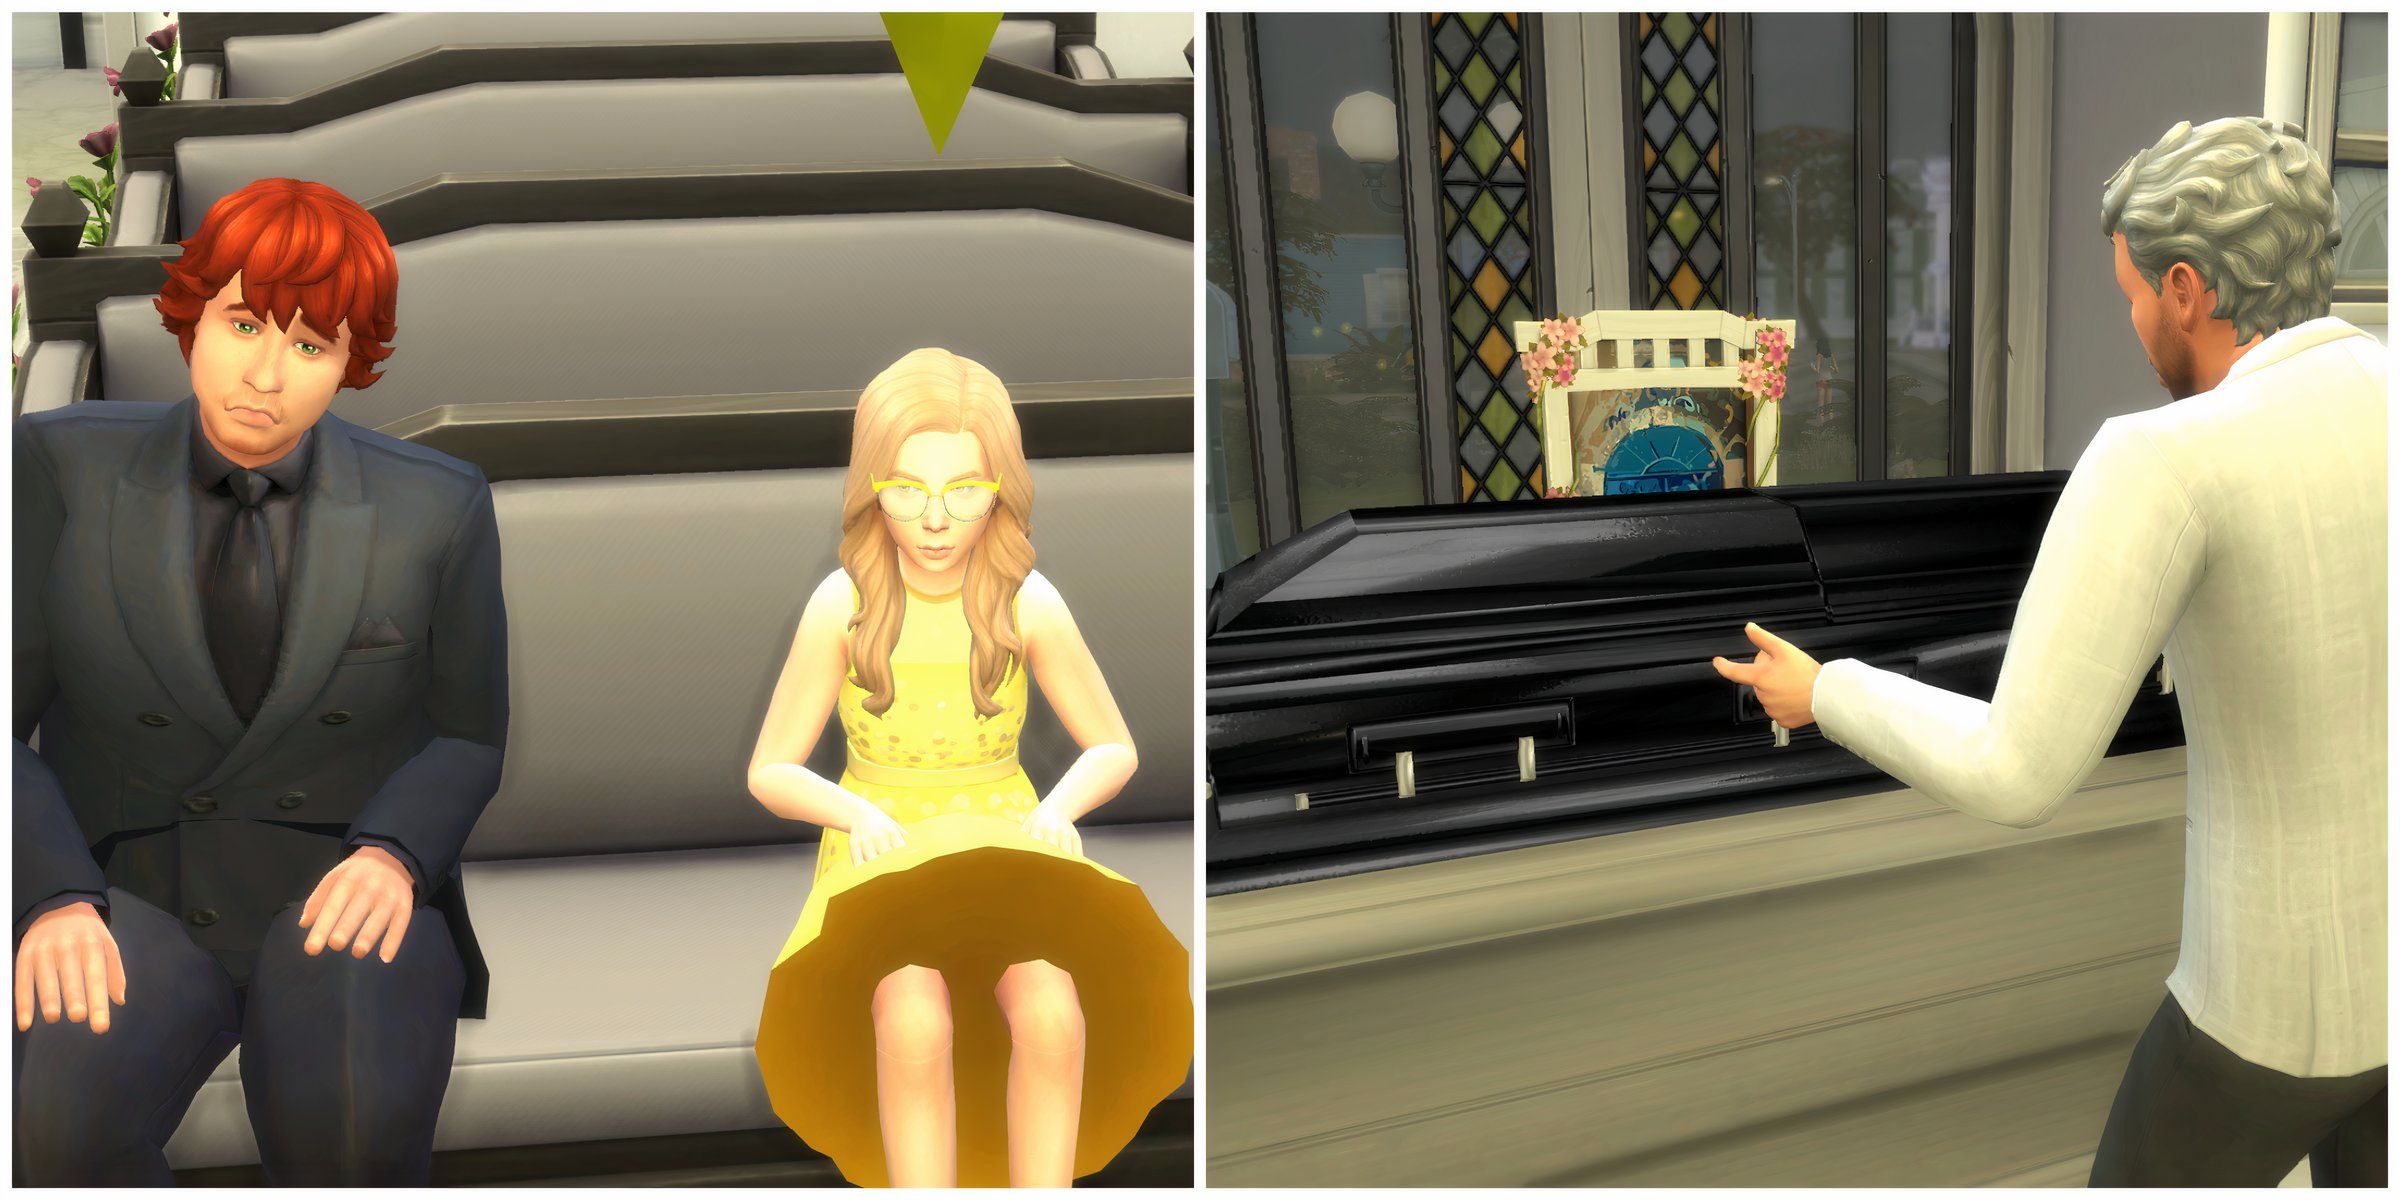 Sims attending a Funeral Service Event